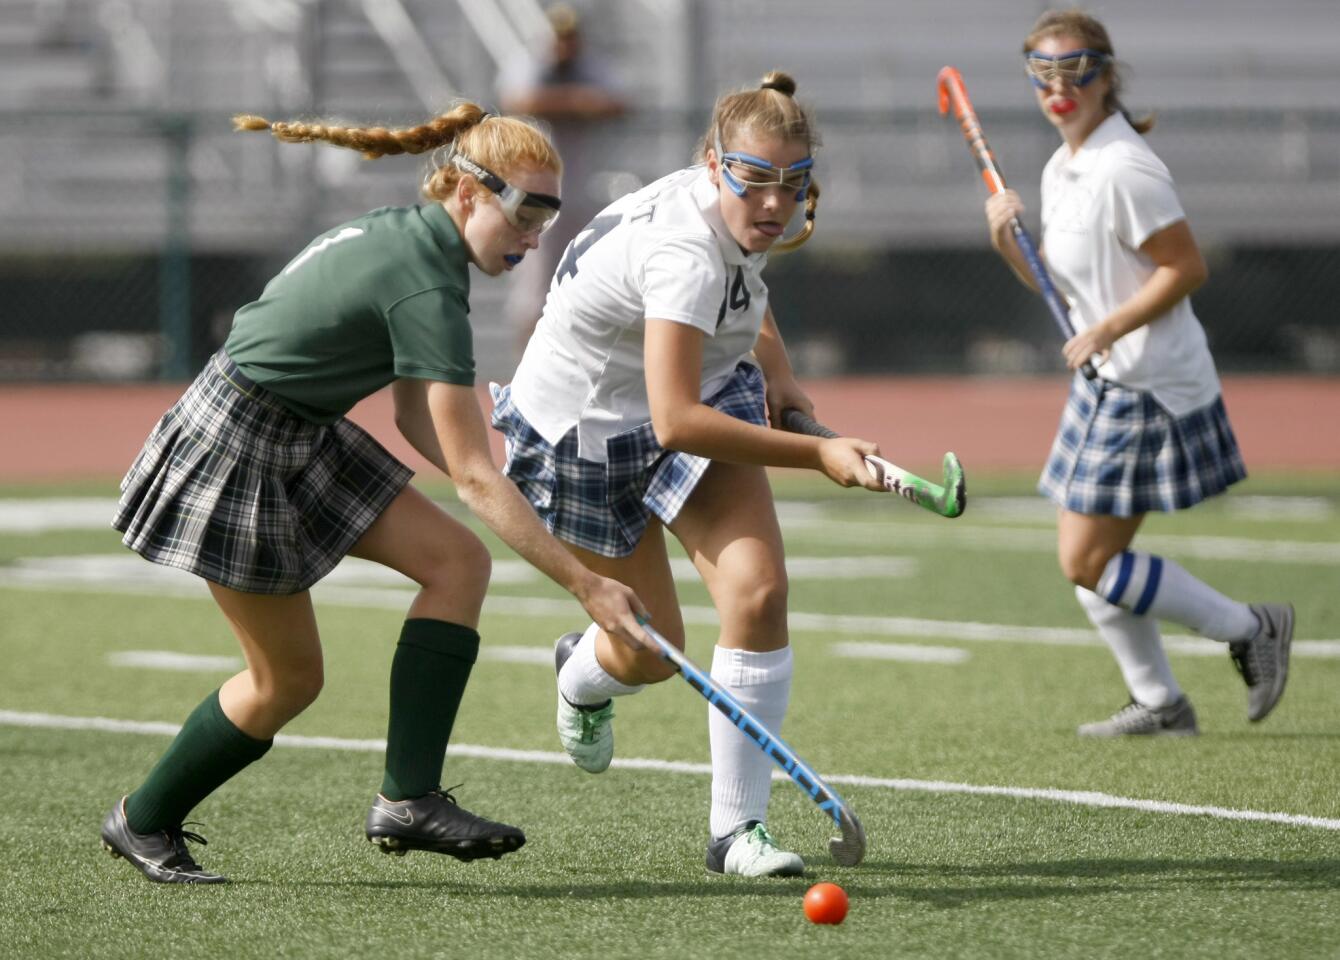 Photo Gallery: Newport Harbor High School field hockey takes title with OT win over Edison High School in Tournament of Champions championship match